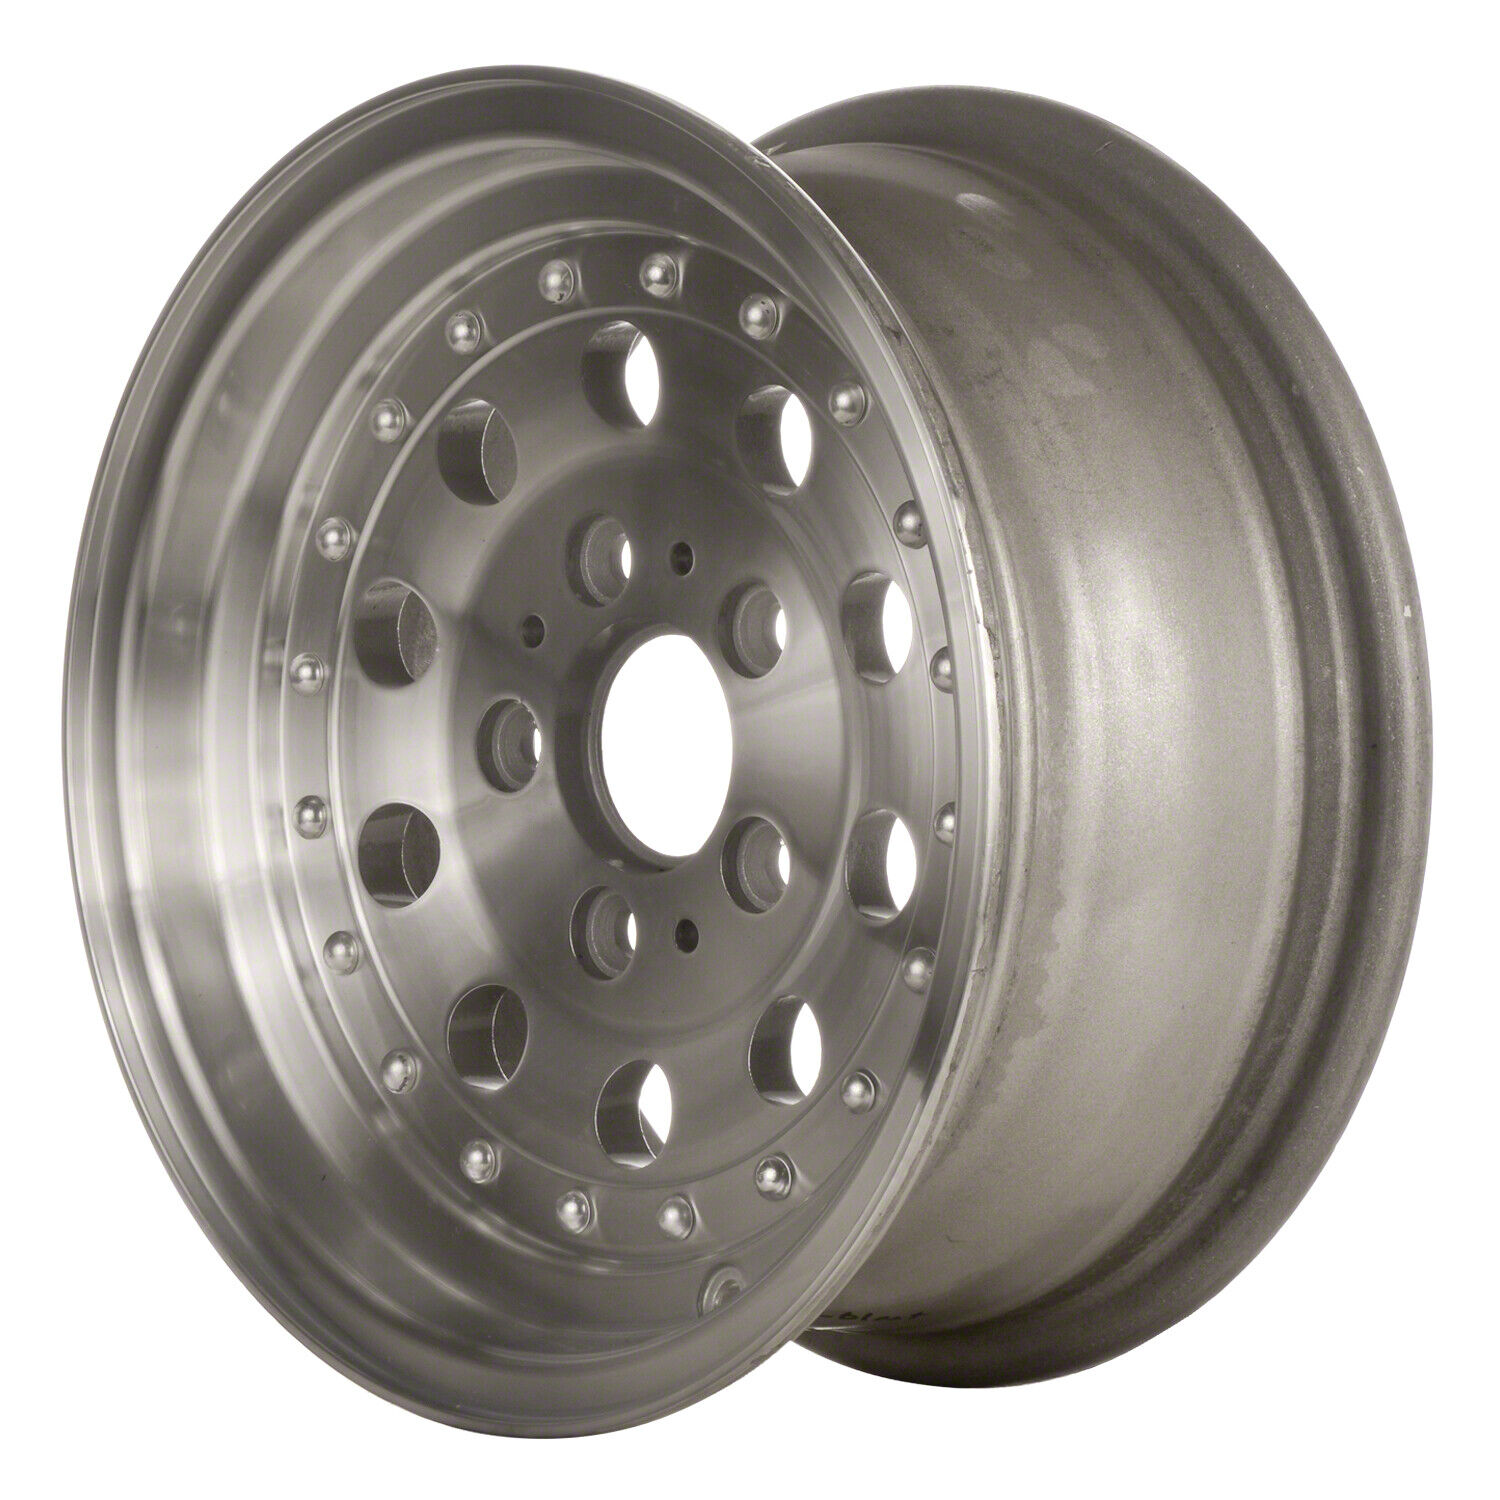 01592 Reconditioned OEM Aluminum Wheel 14x6 fits 1989-1990 Ford Bronco II